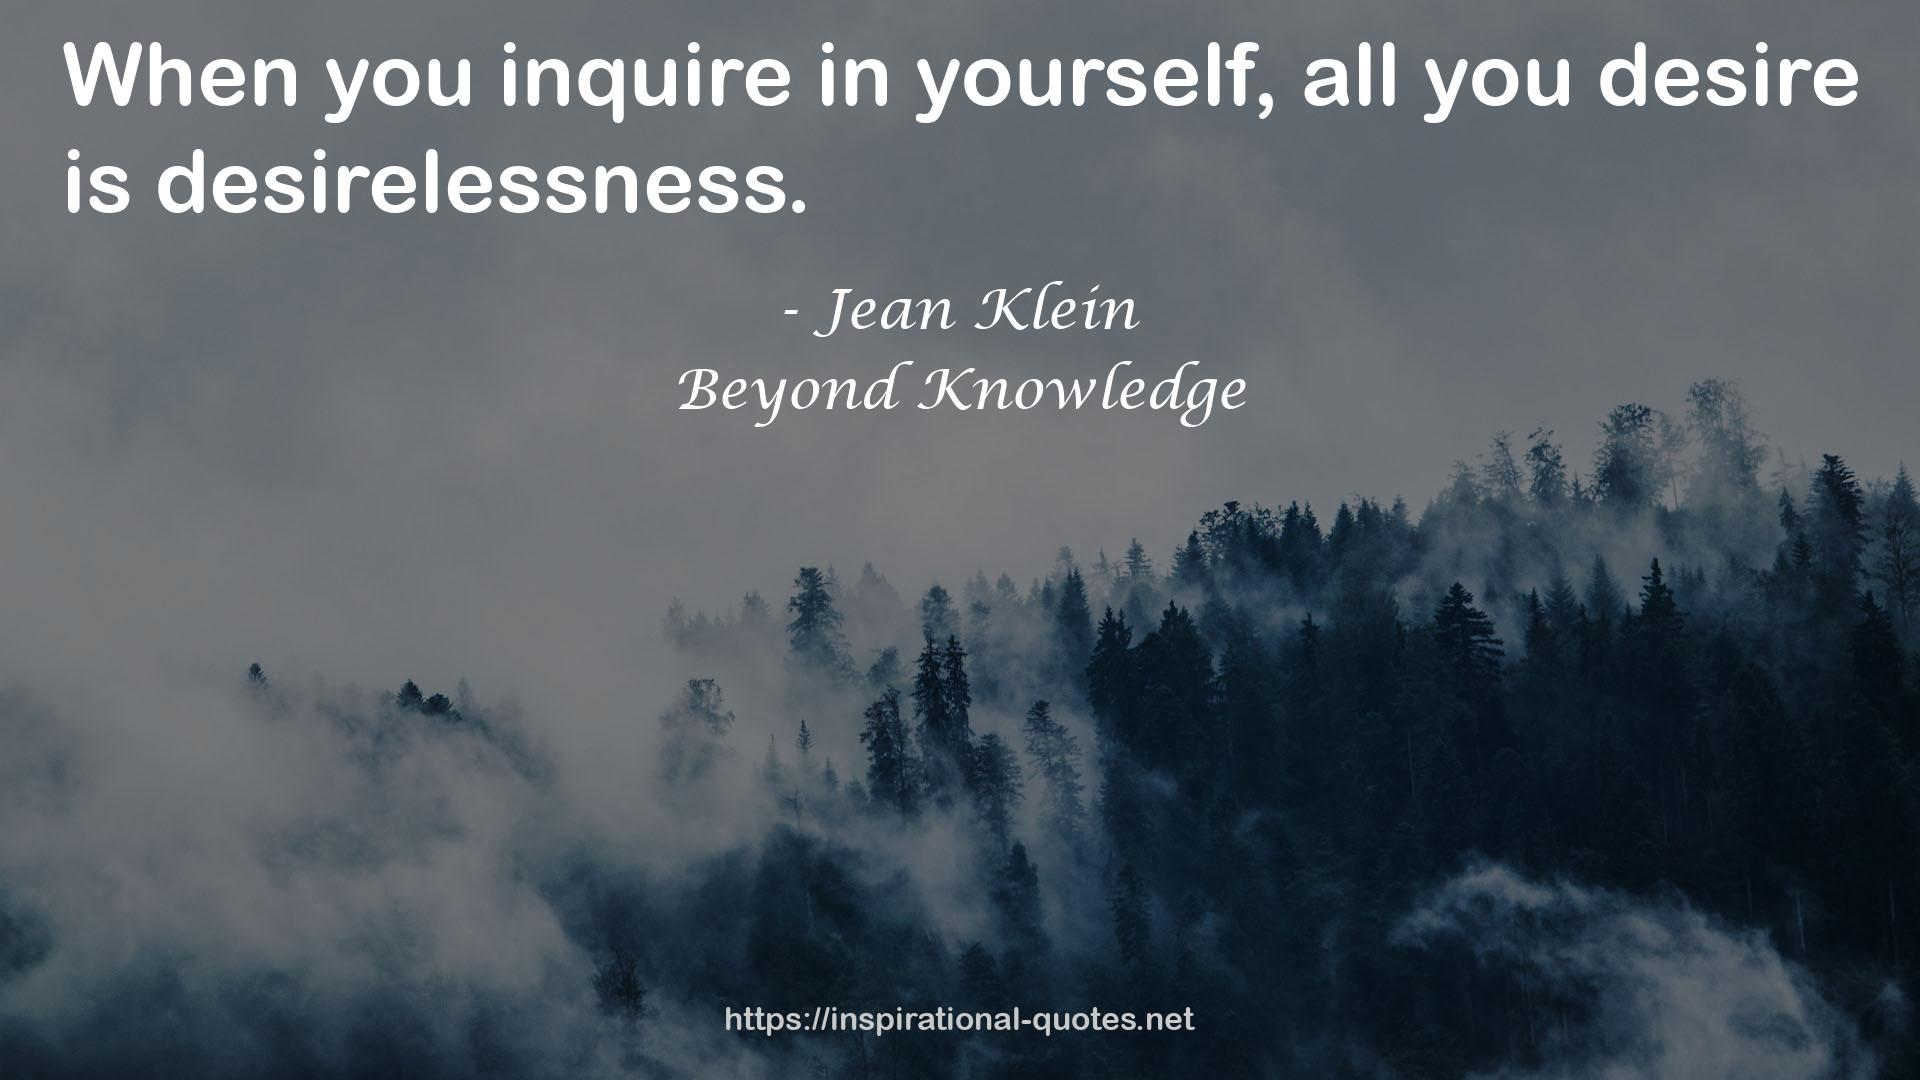 Beyond Knowledge QUOTES